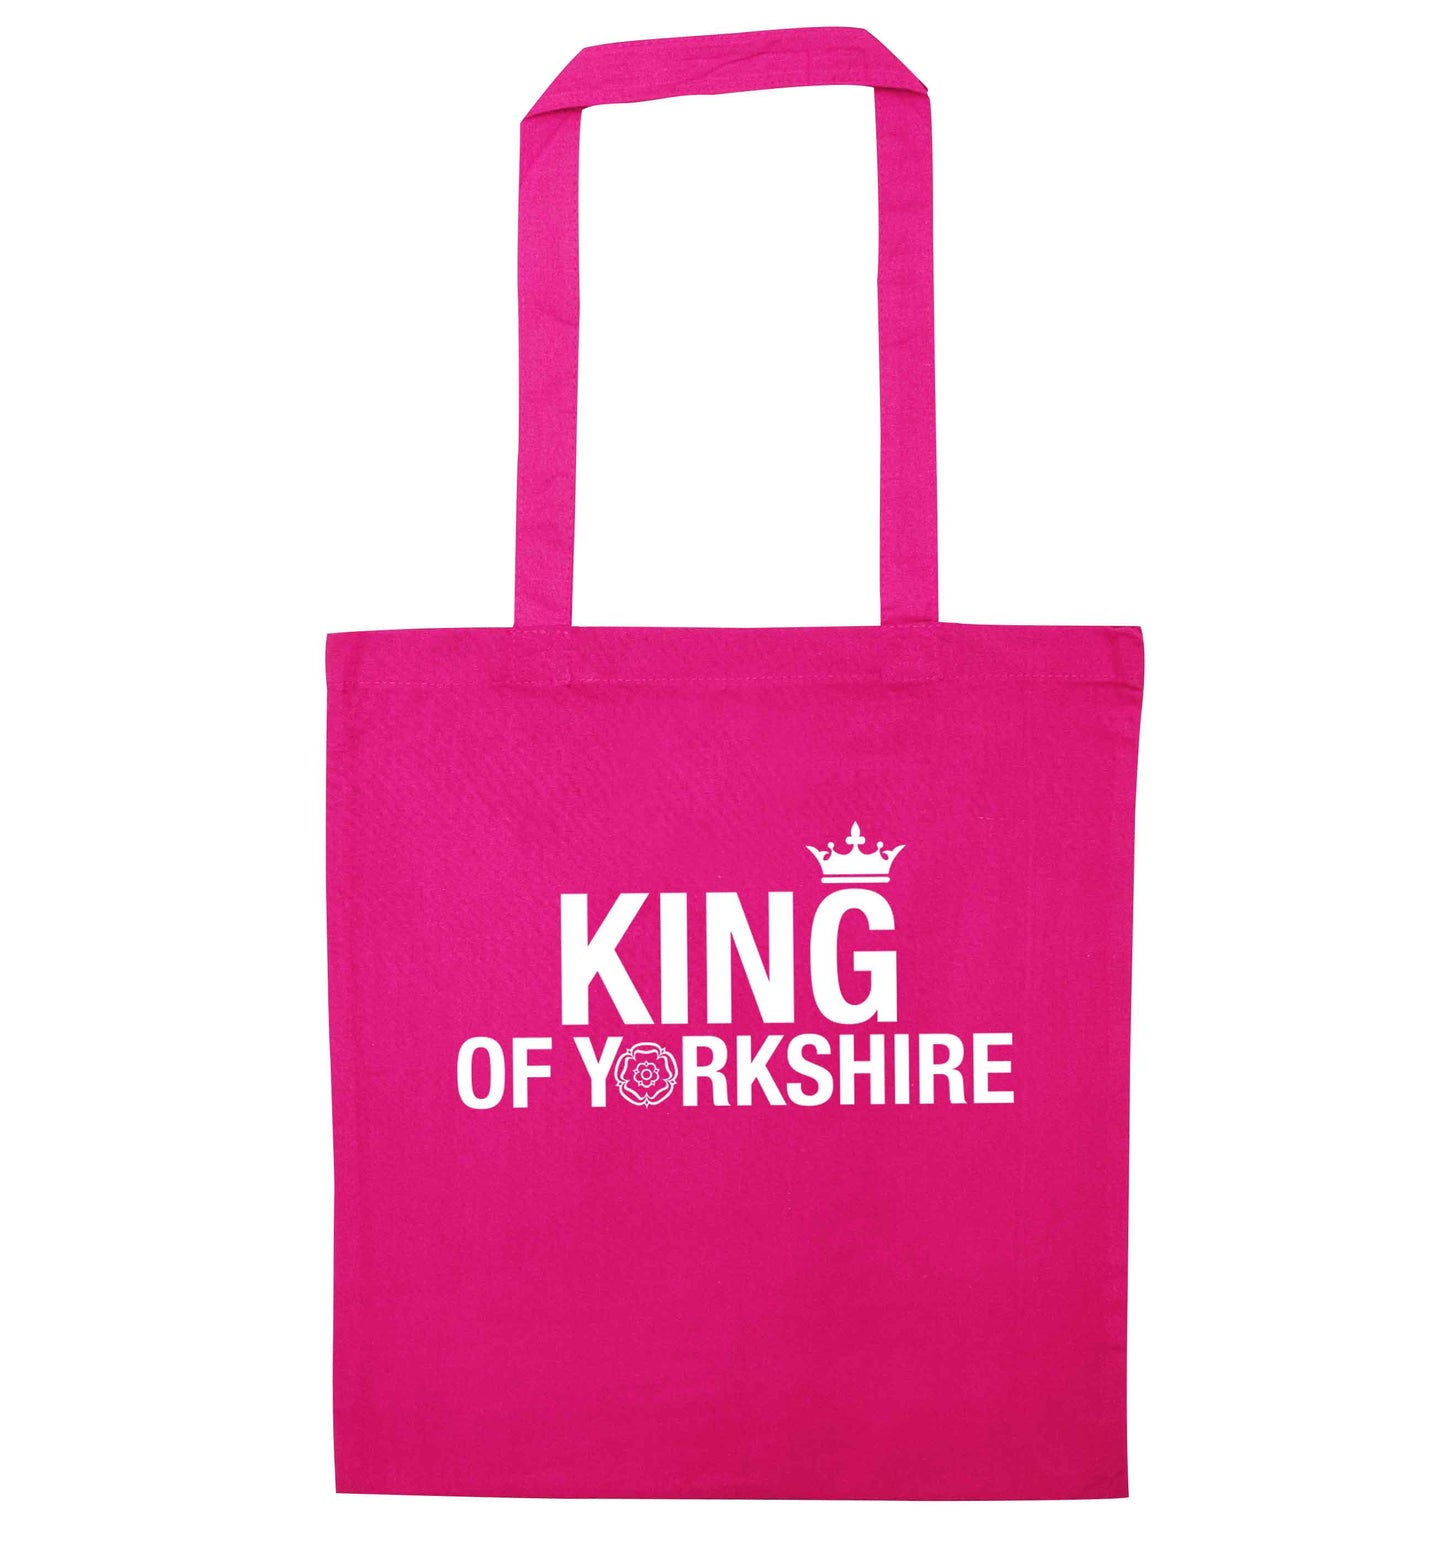 King of Yorkshire pink tote bag